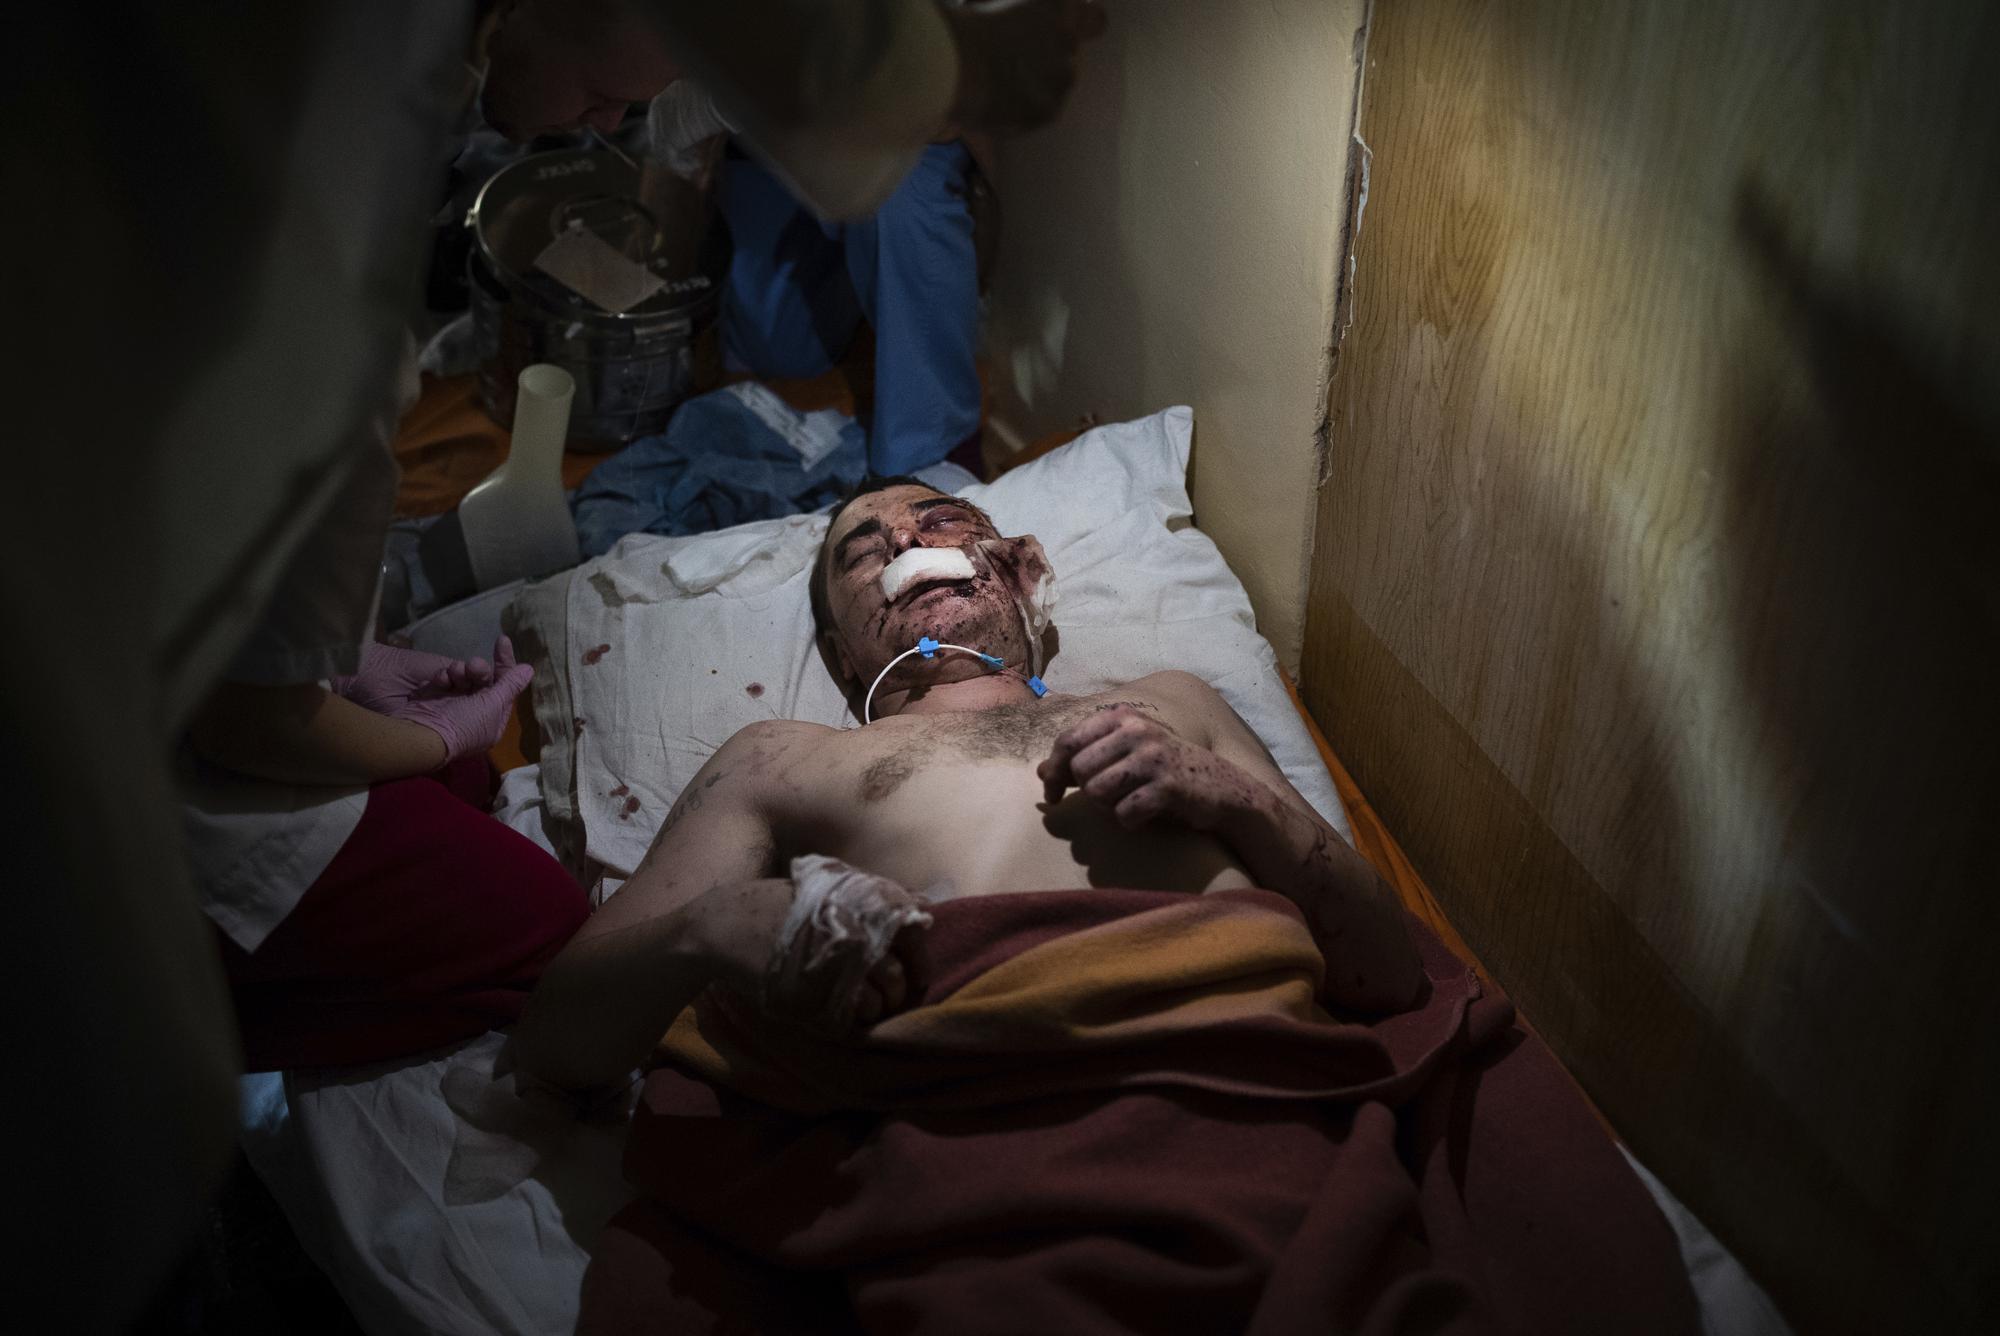 Medical workers treat a man, wounded by shelling, in a hospital in Mariupol, Ukraine, Friday, March 4, 2022. (AP Photo/Mstyslav Chernov)